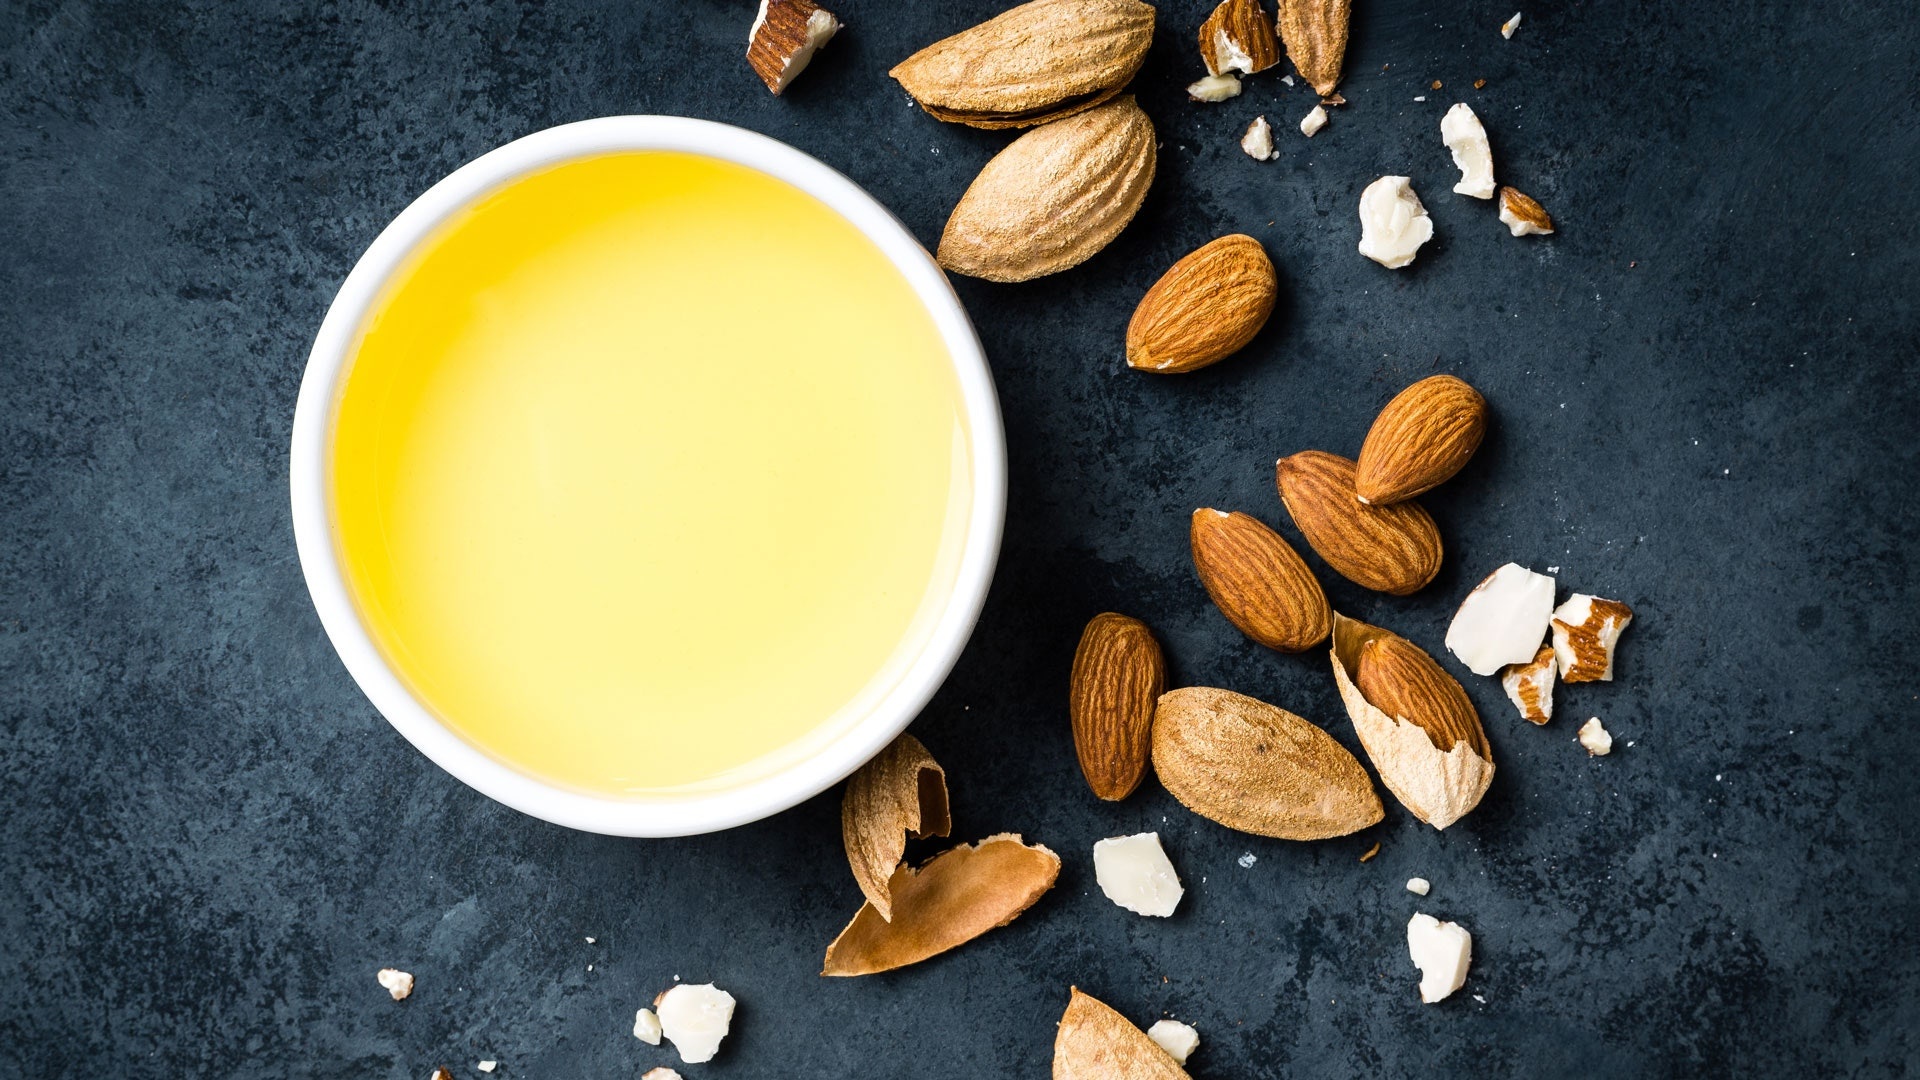 Almond oil skincare, Hair growth benefits, Vogue India recommendation, Beauty care essentials, 1920x1080 Full HD Desktop